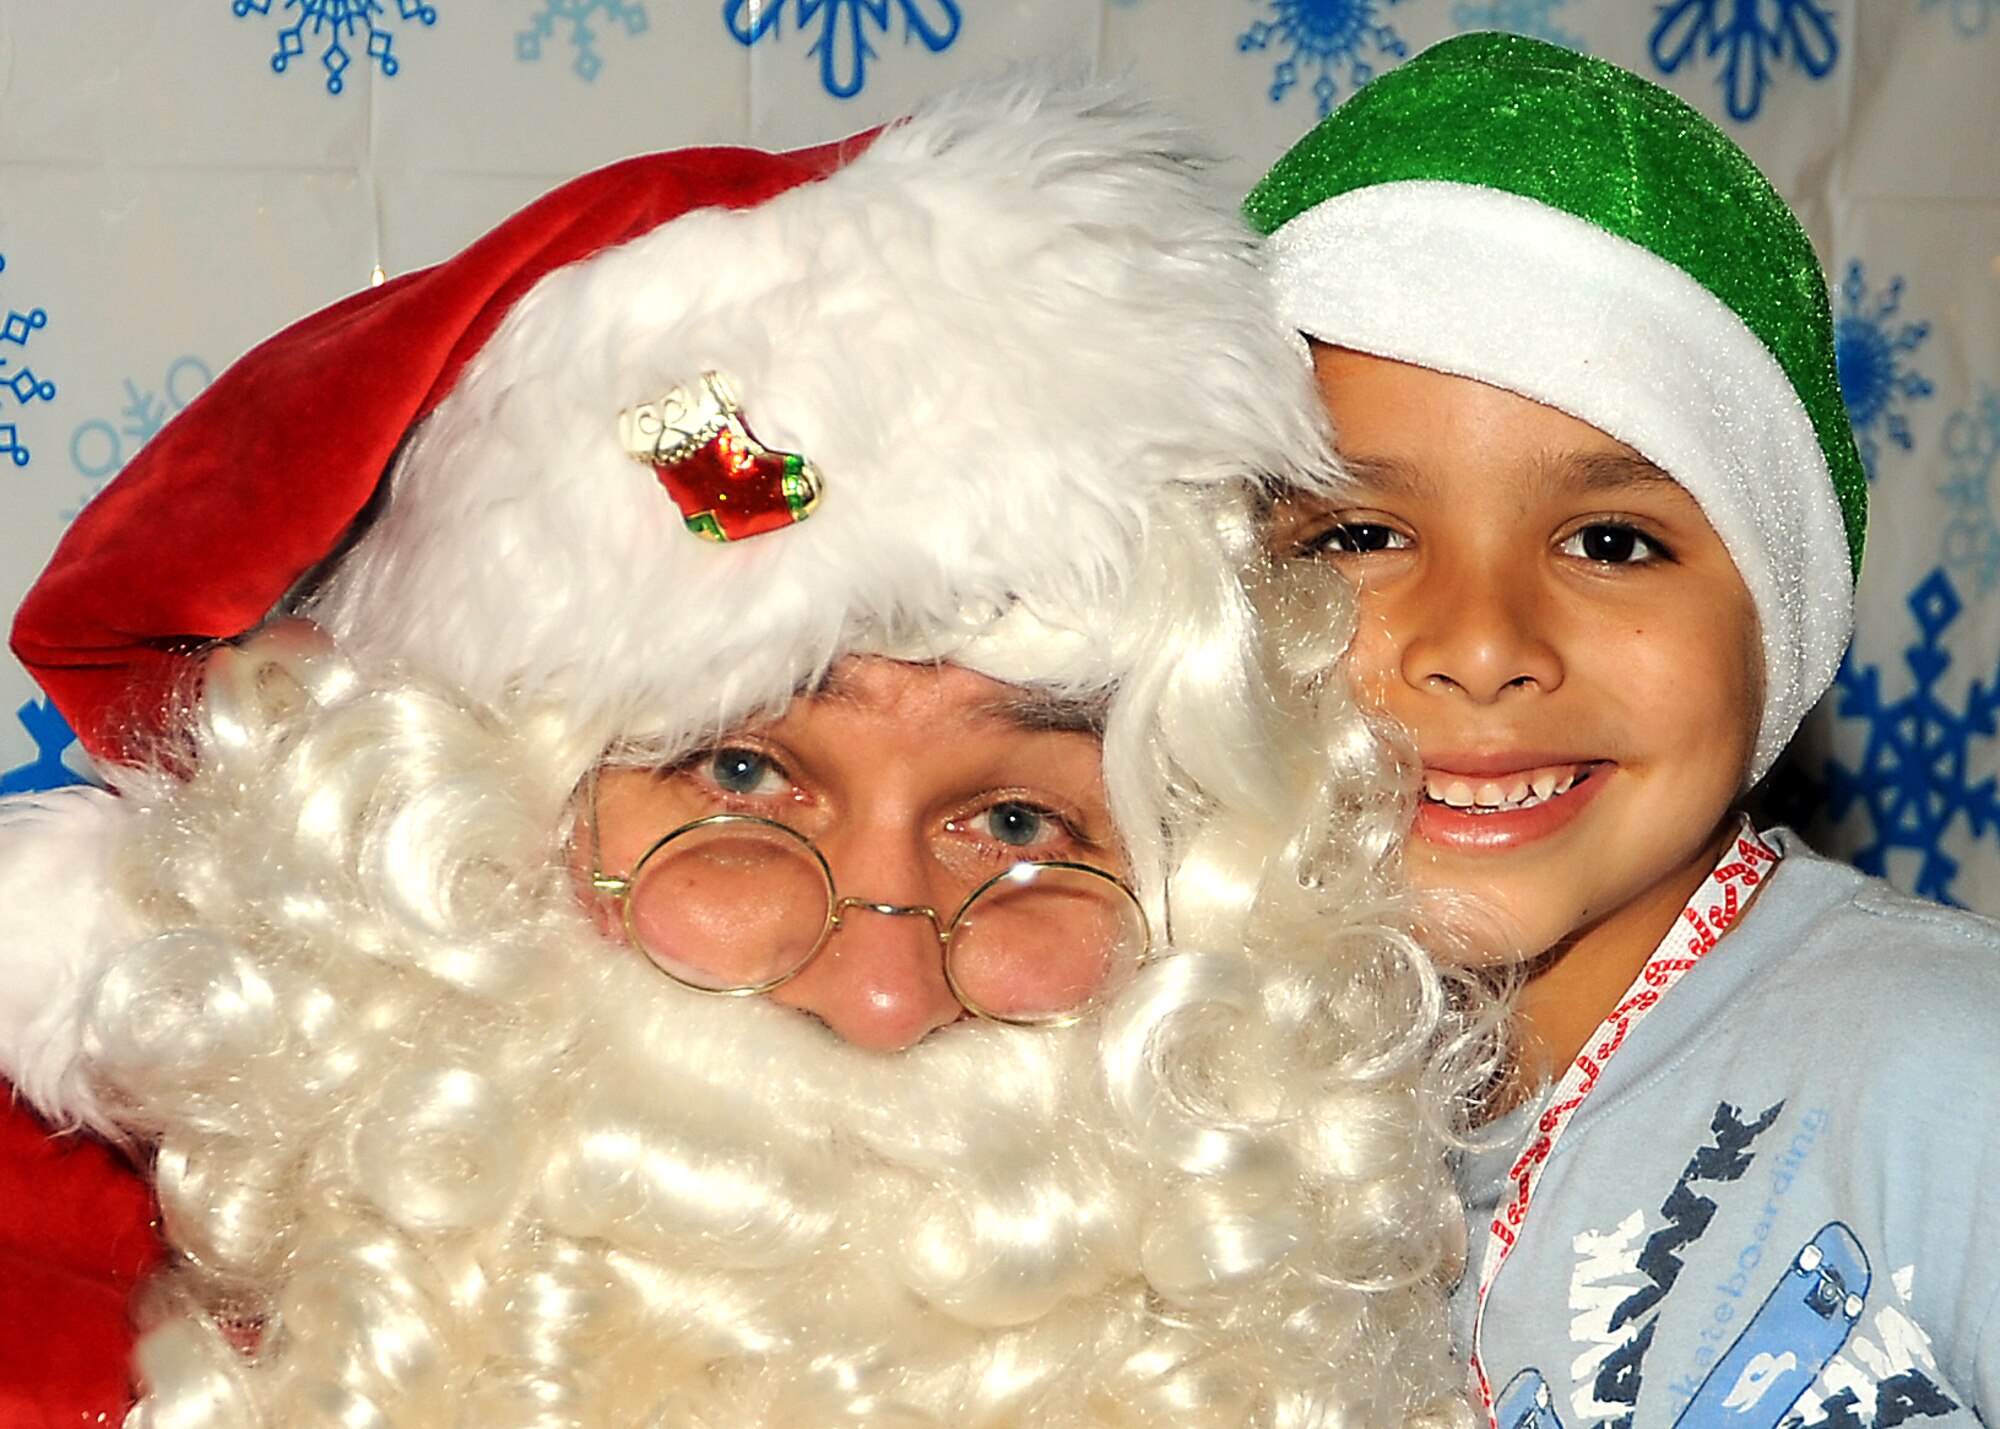 Mike Ibarra (age 7) poses for a picture with Santa during the “Candy Land” children’s holiday celebration at Fort MacArthur Hall, San Pedro, Calif., Dec. 12. Los Angeles Air Force Base’s Youth Programs provided food, fun and games for children ages 2-11. (Photo by Joe Juarez)